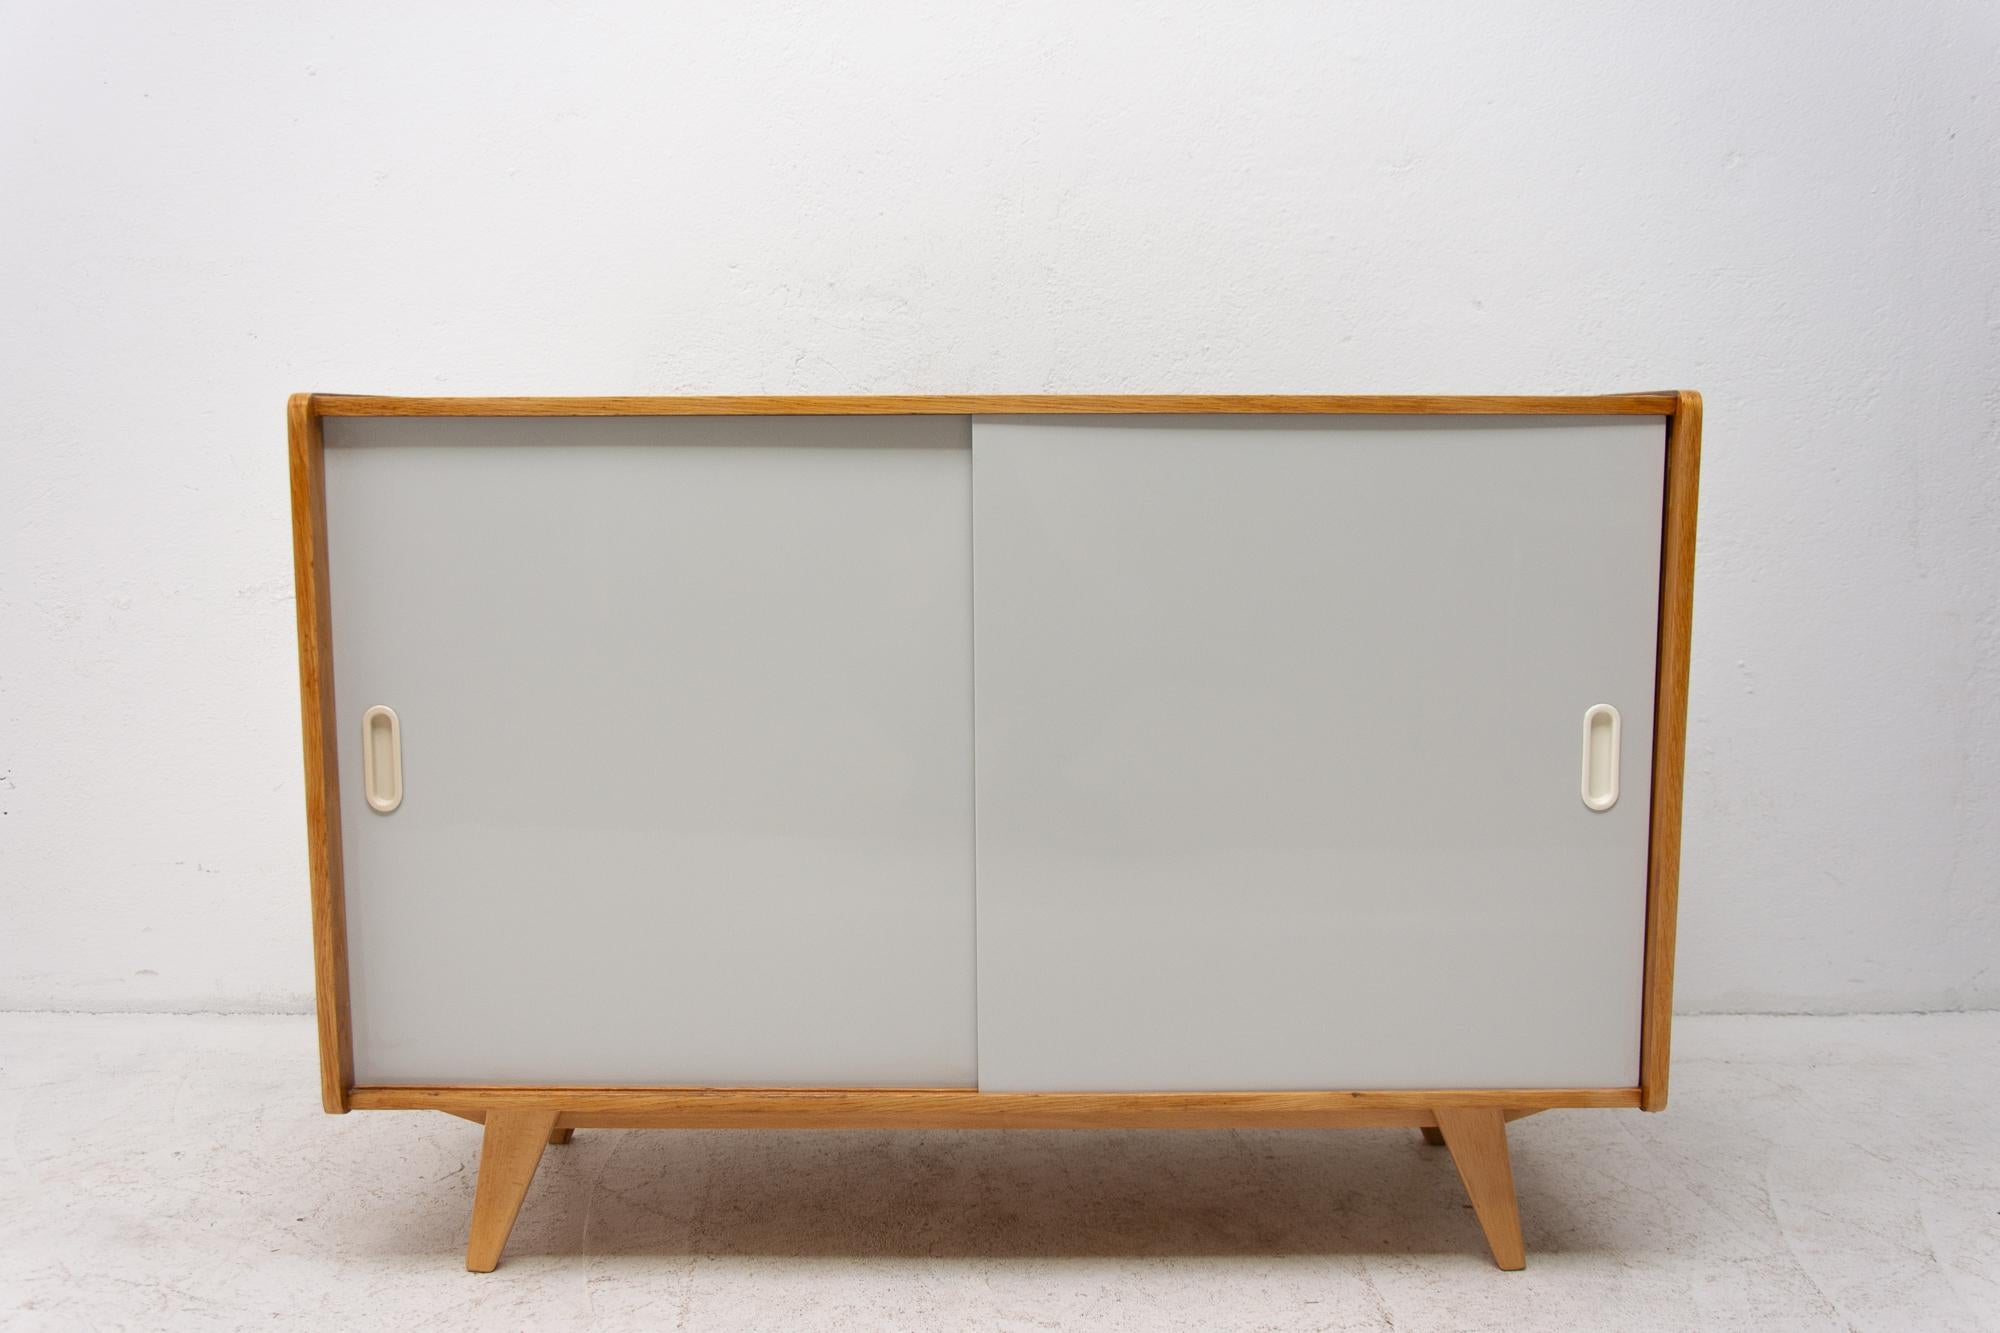 Midcentury sideboard, catalogue No. U-452, designed by Jiri Jiroutek. It features a sliding doors and one long shelf inside. It´s made from the beechwood, veneer, plywood and laminate. In excellent condition, fully refurbished.